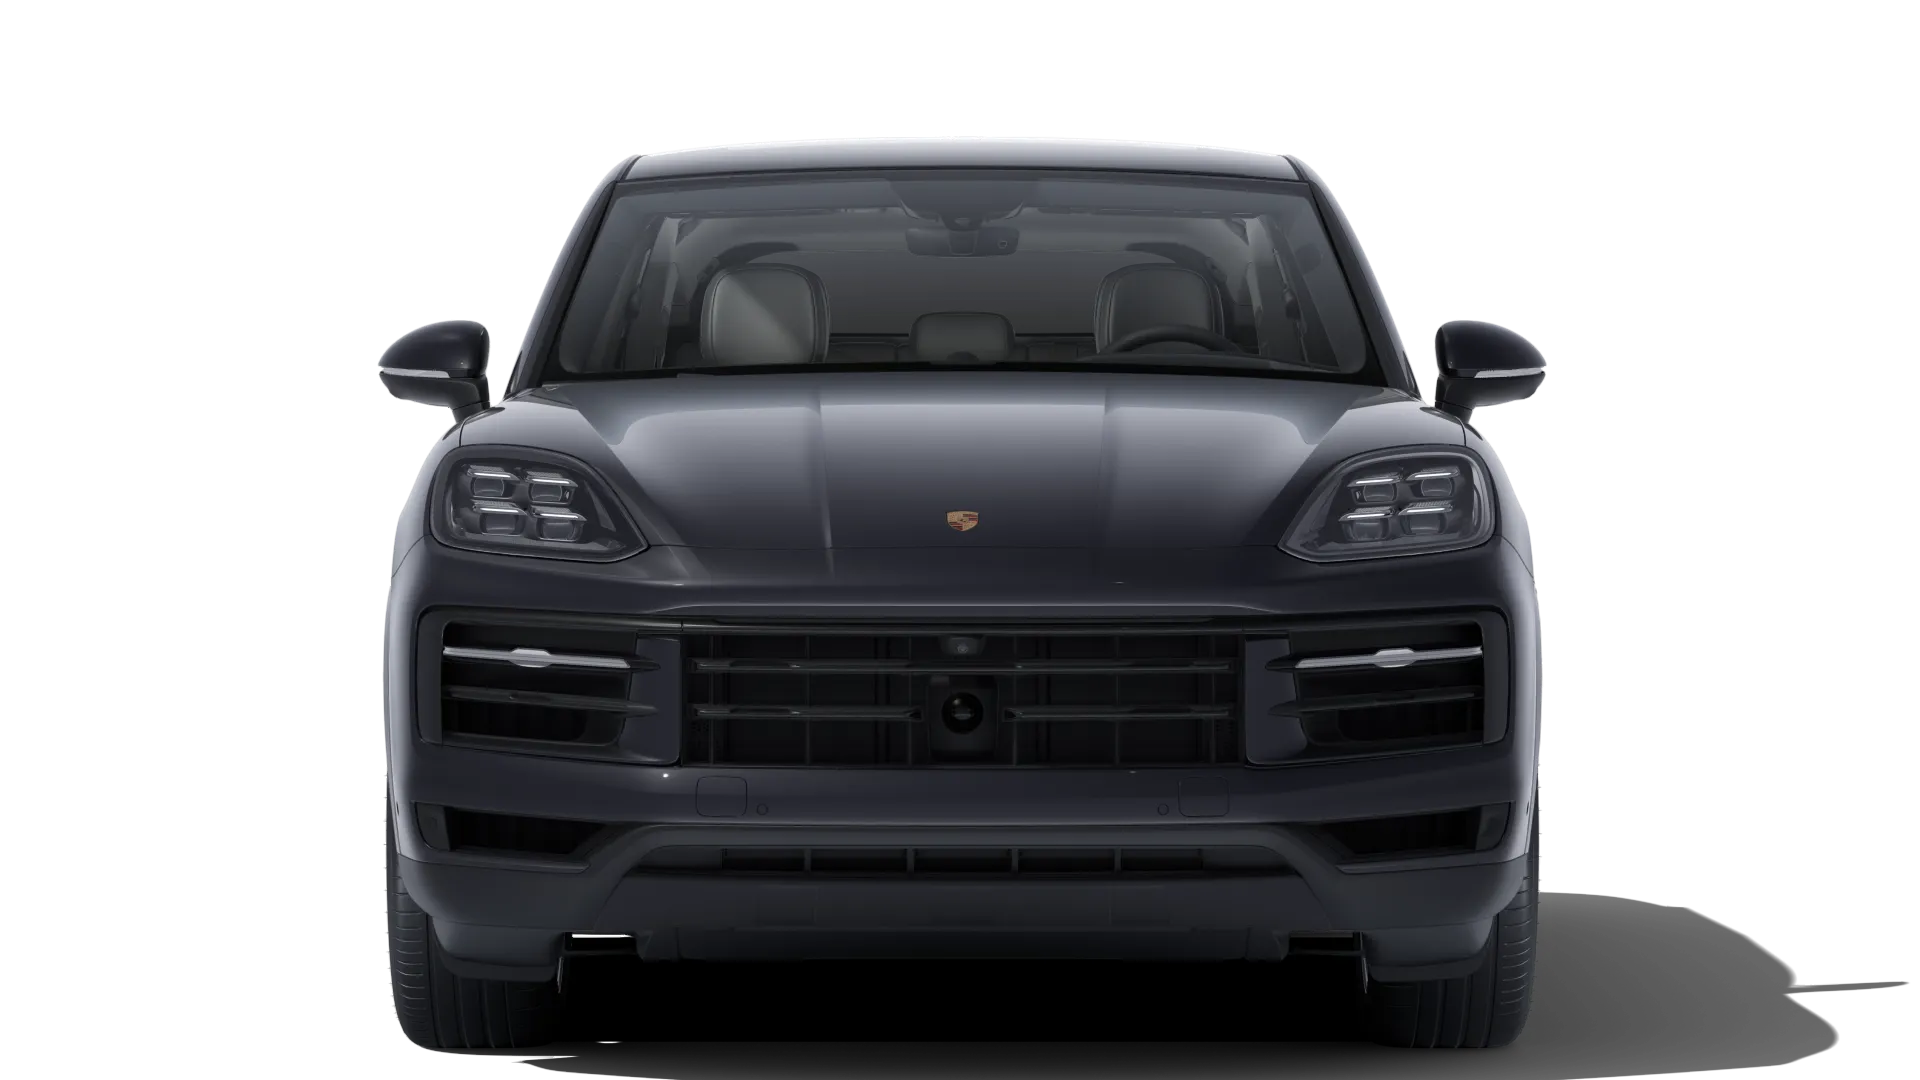 Exterior view of The New Cayenne Coupe